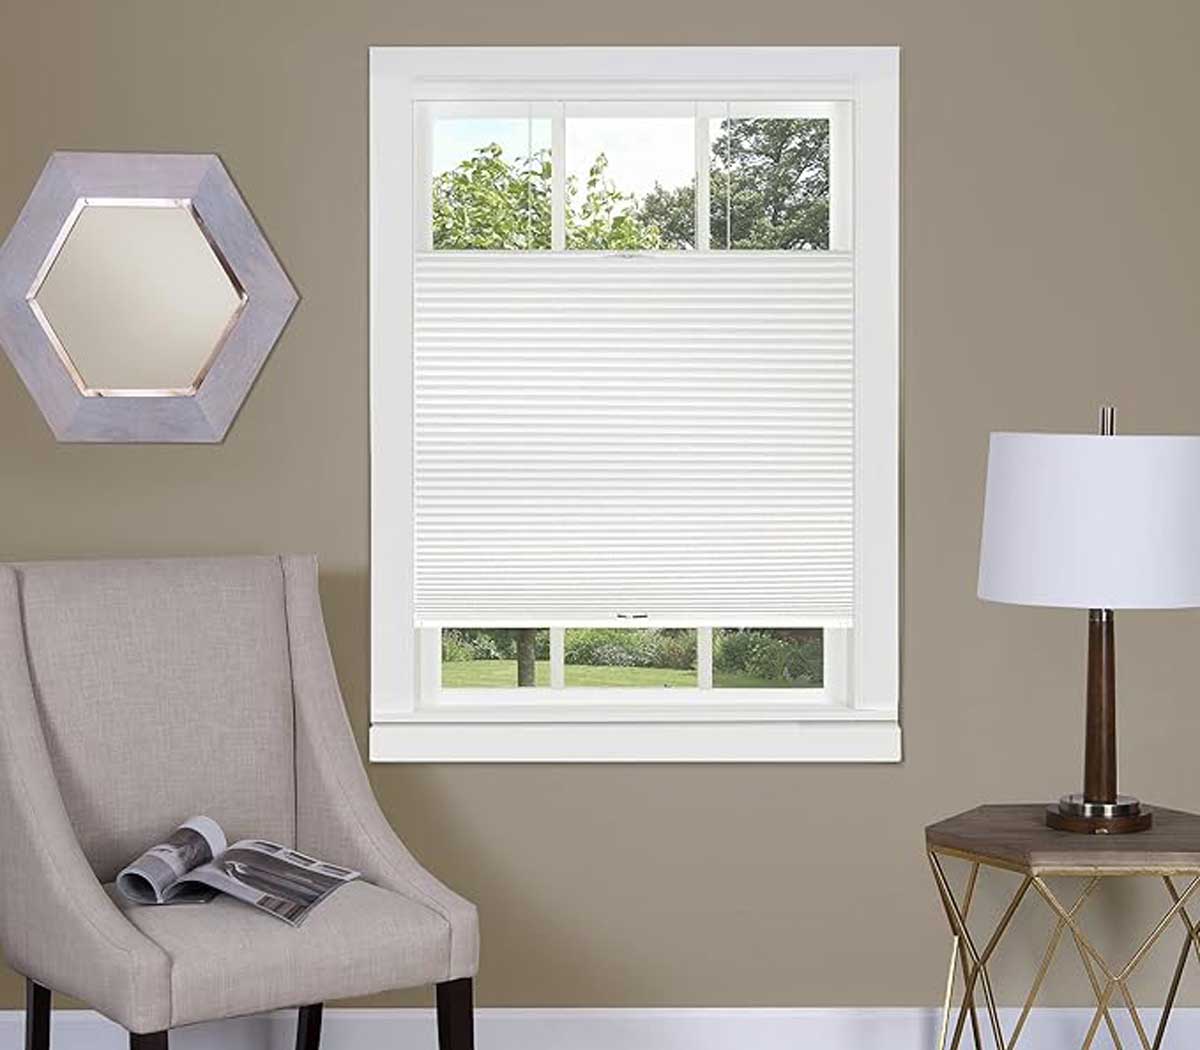 day night cellular blinds